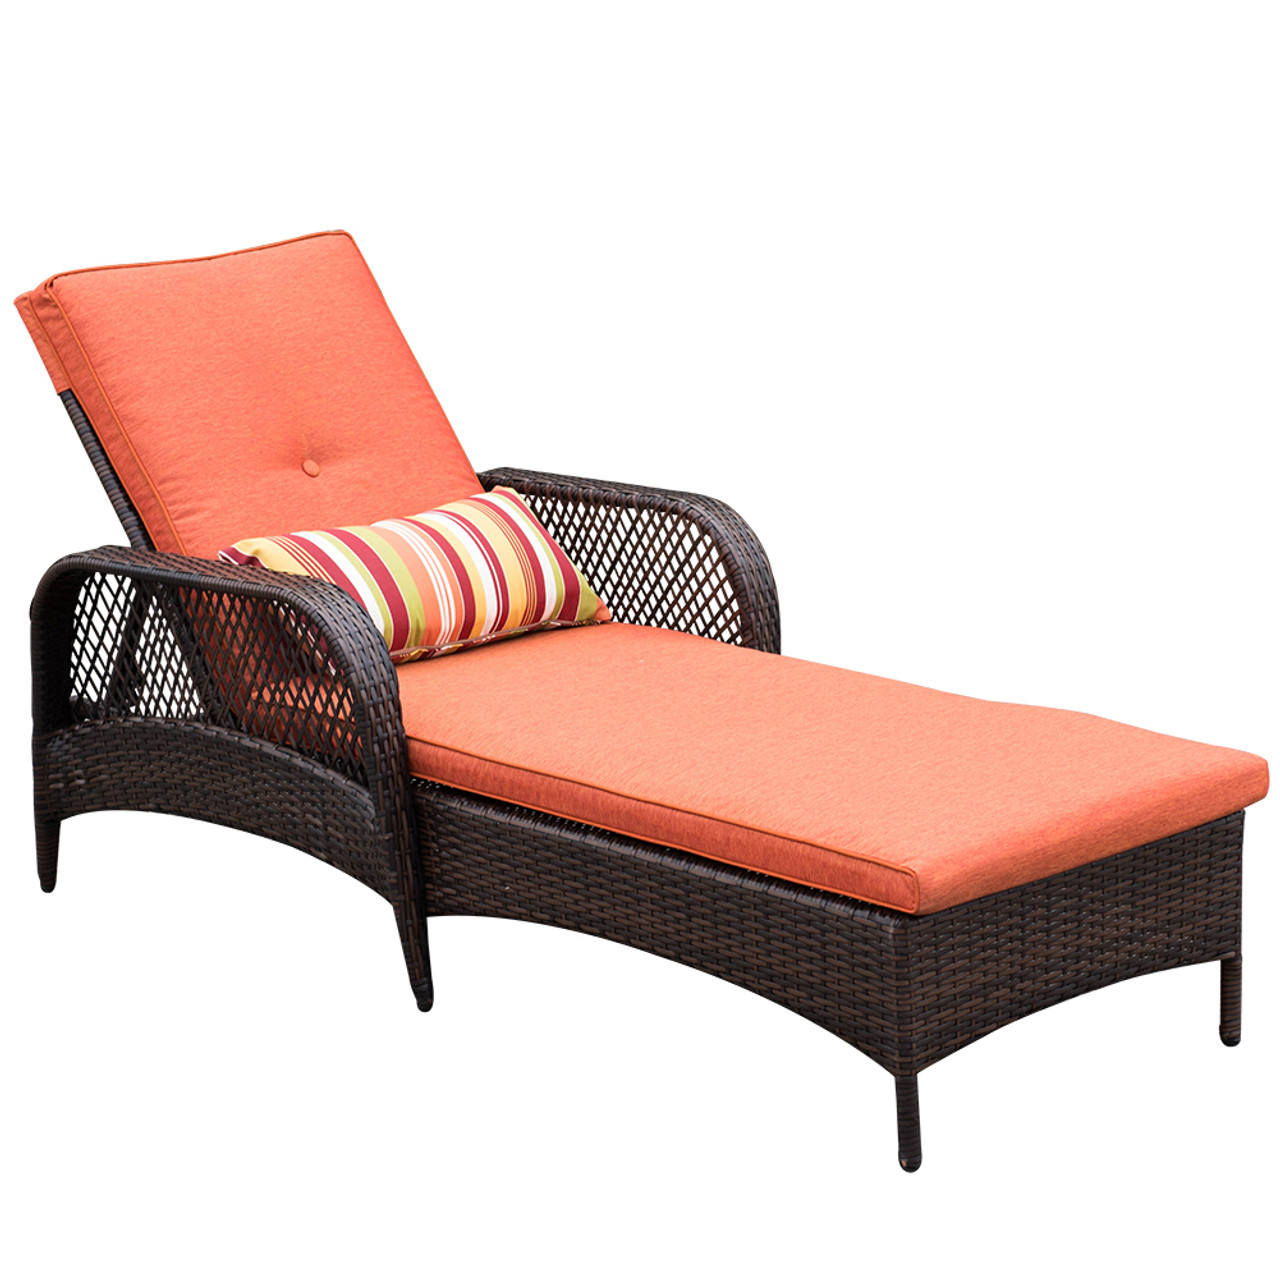 Luxury Reclining Brown Wicker Chaise Lounge Chair Outdoor Patio Yard